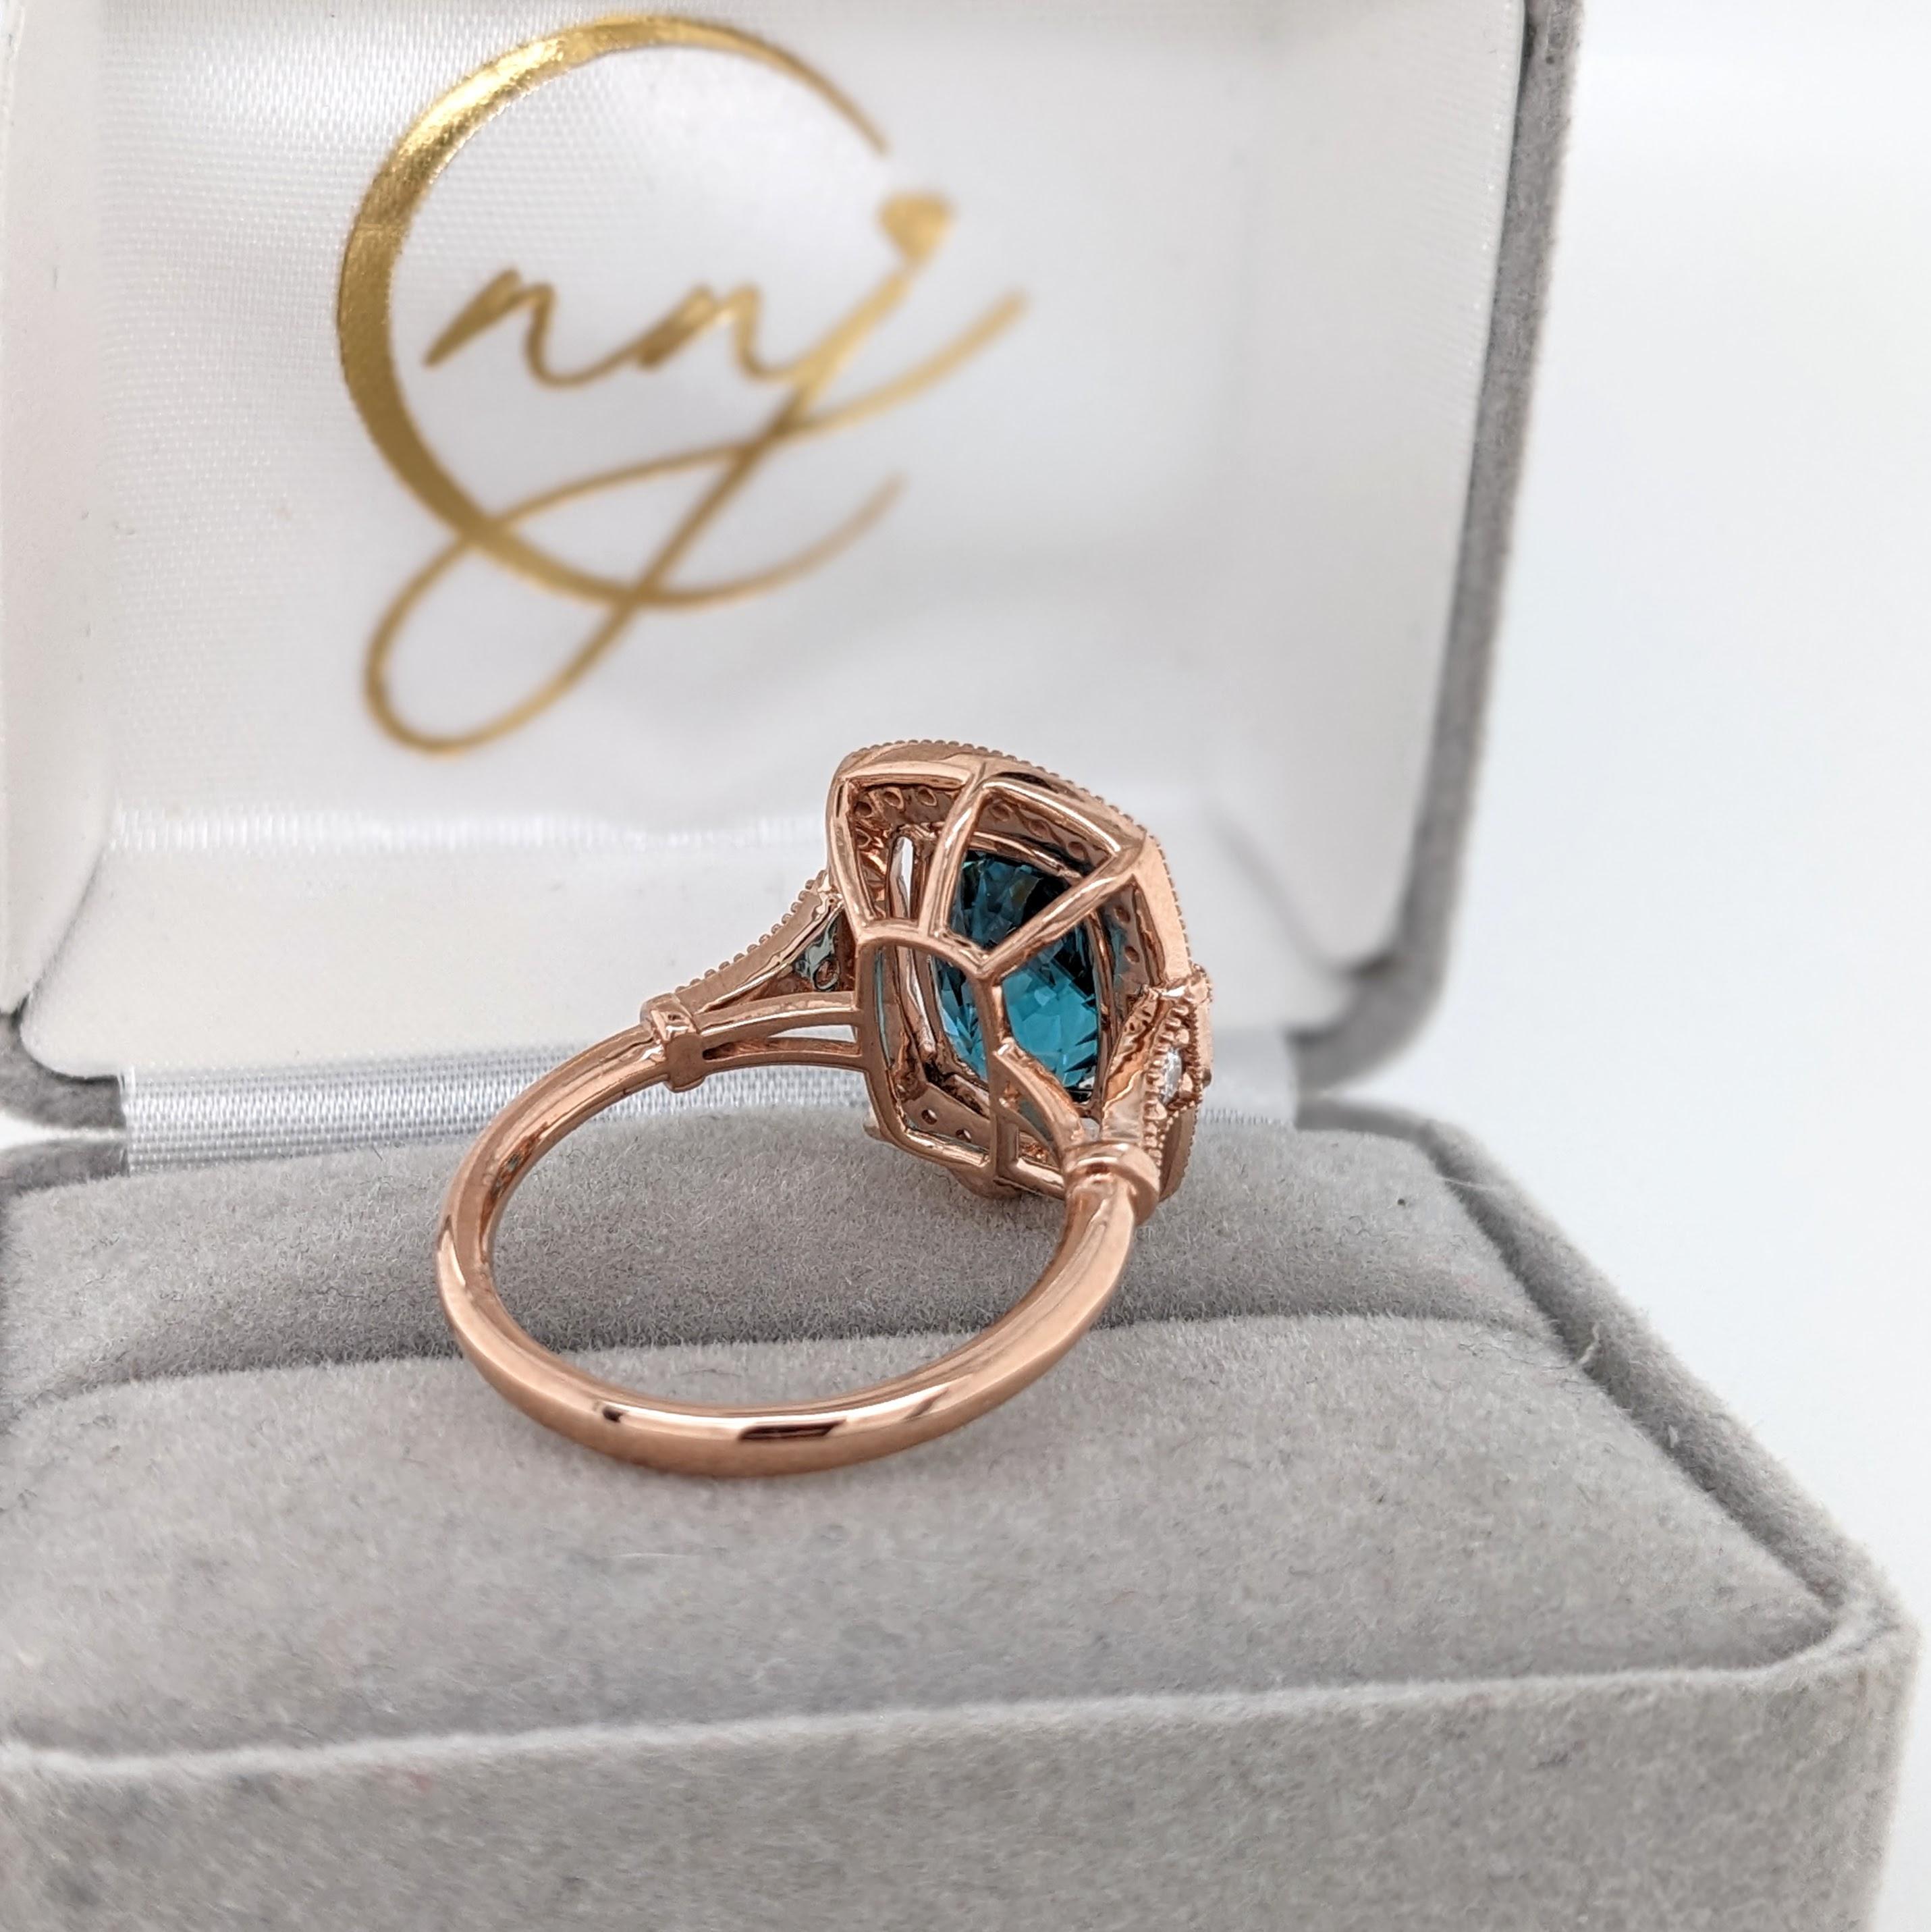 5.4ct Blue Zircon Ring w Earth Mined Diamonds in Solid 14K Rose Gold CU 10x7mm For Sale 3